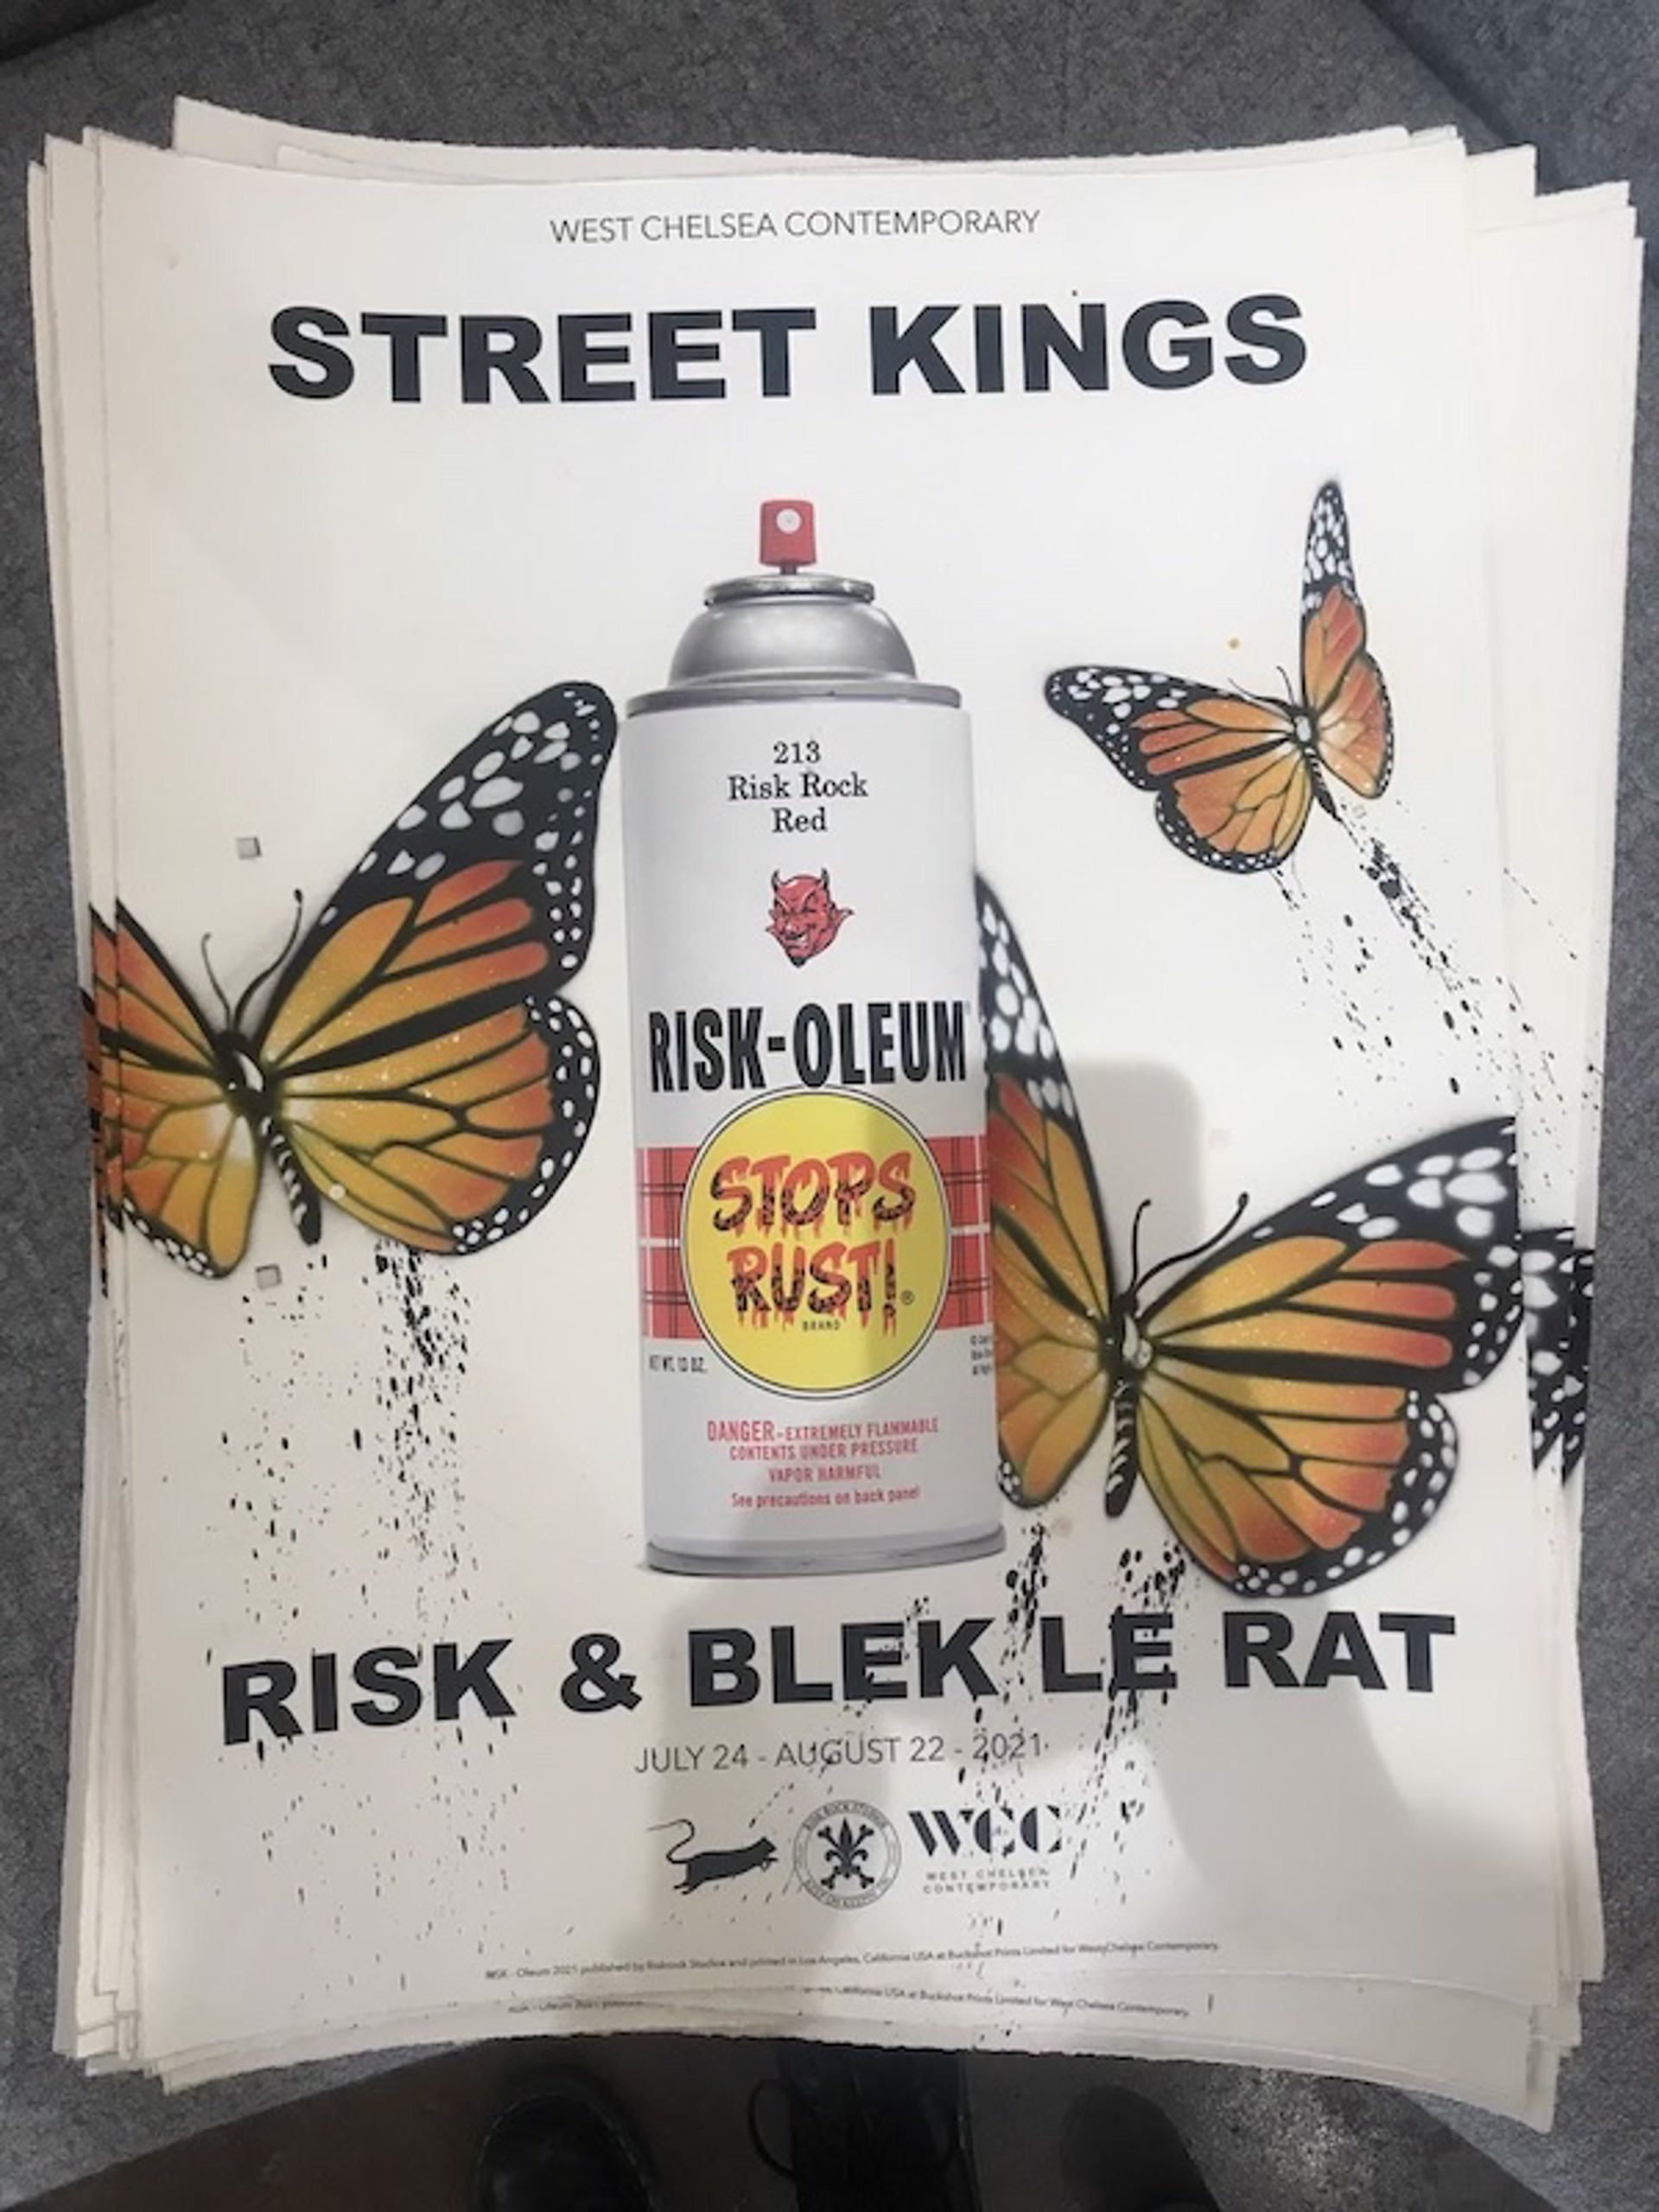 Street Kings Show Print (28/50) by Risk